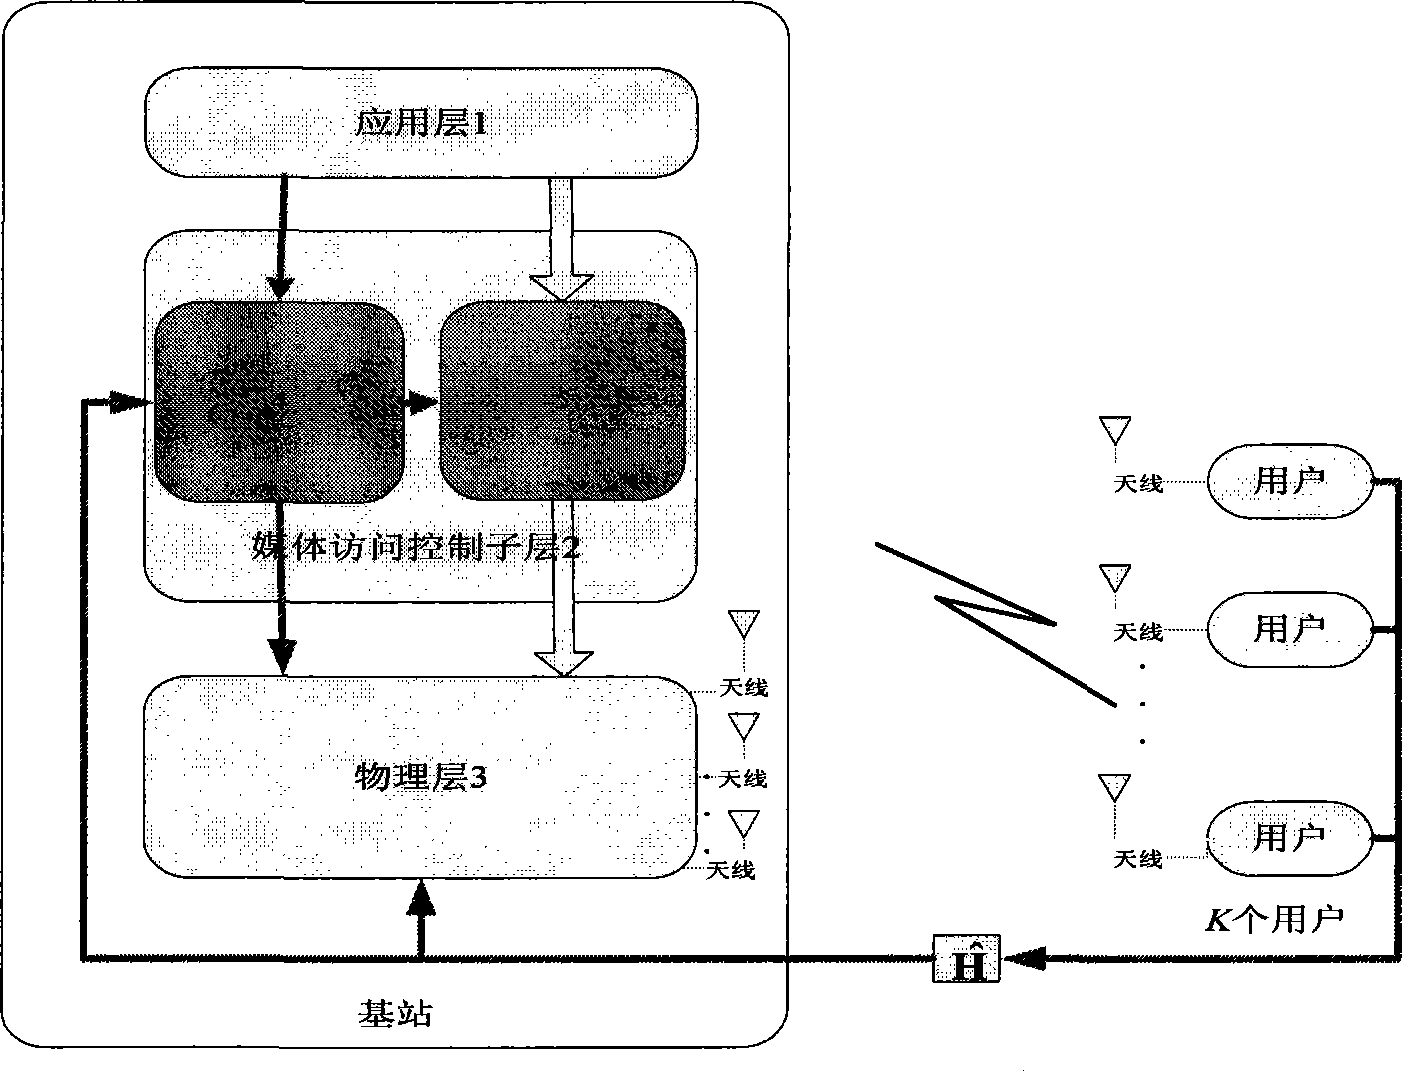 Multi-service multi-antenna broadcast channel scheduling method based on fuzzy satisfactory degree